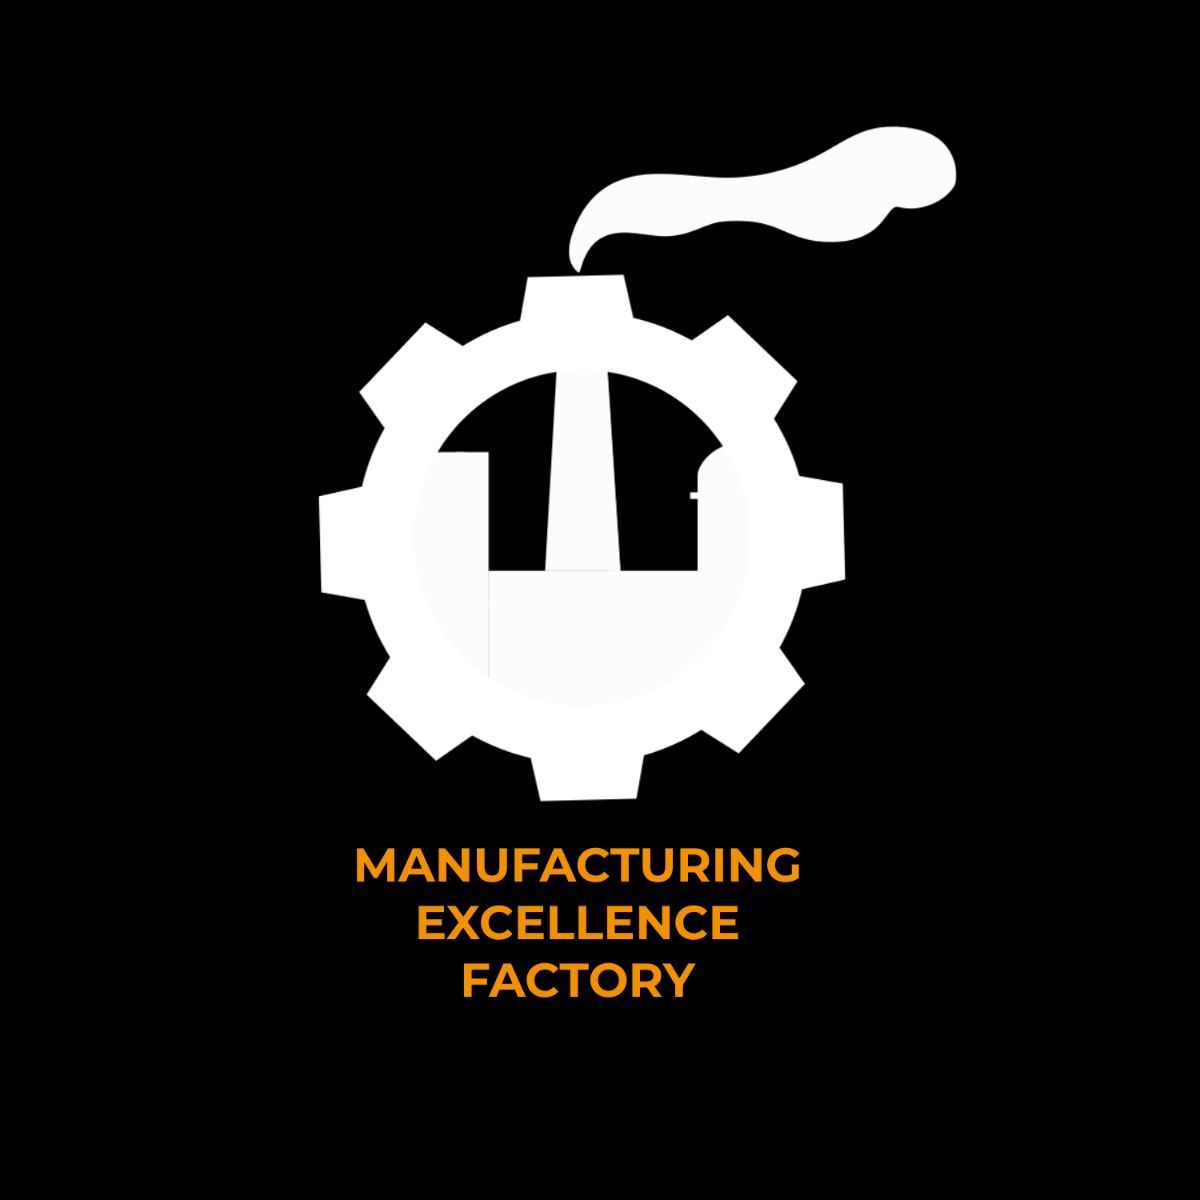 Free Manufacturing Excellence Factory Logo Template